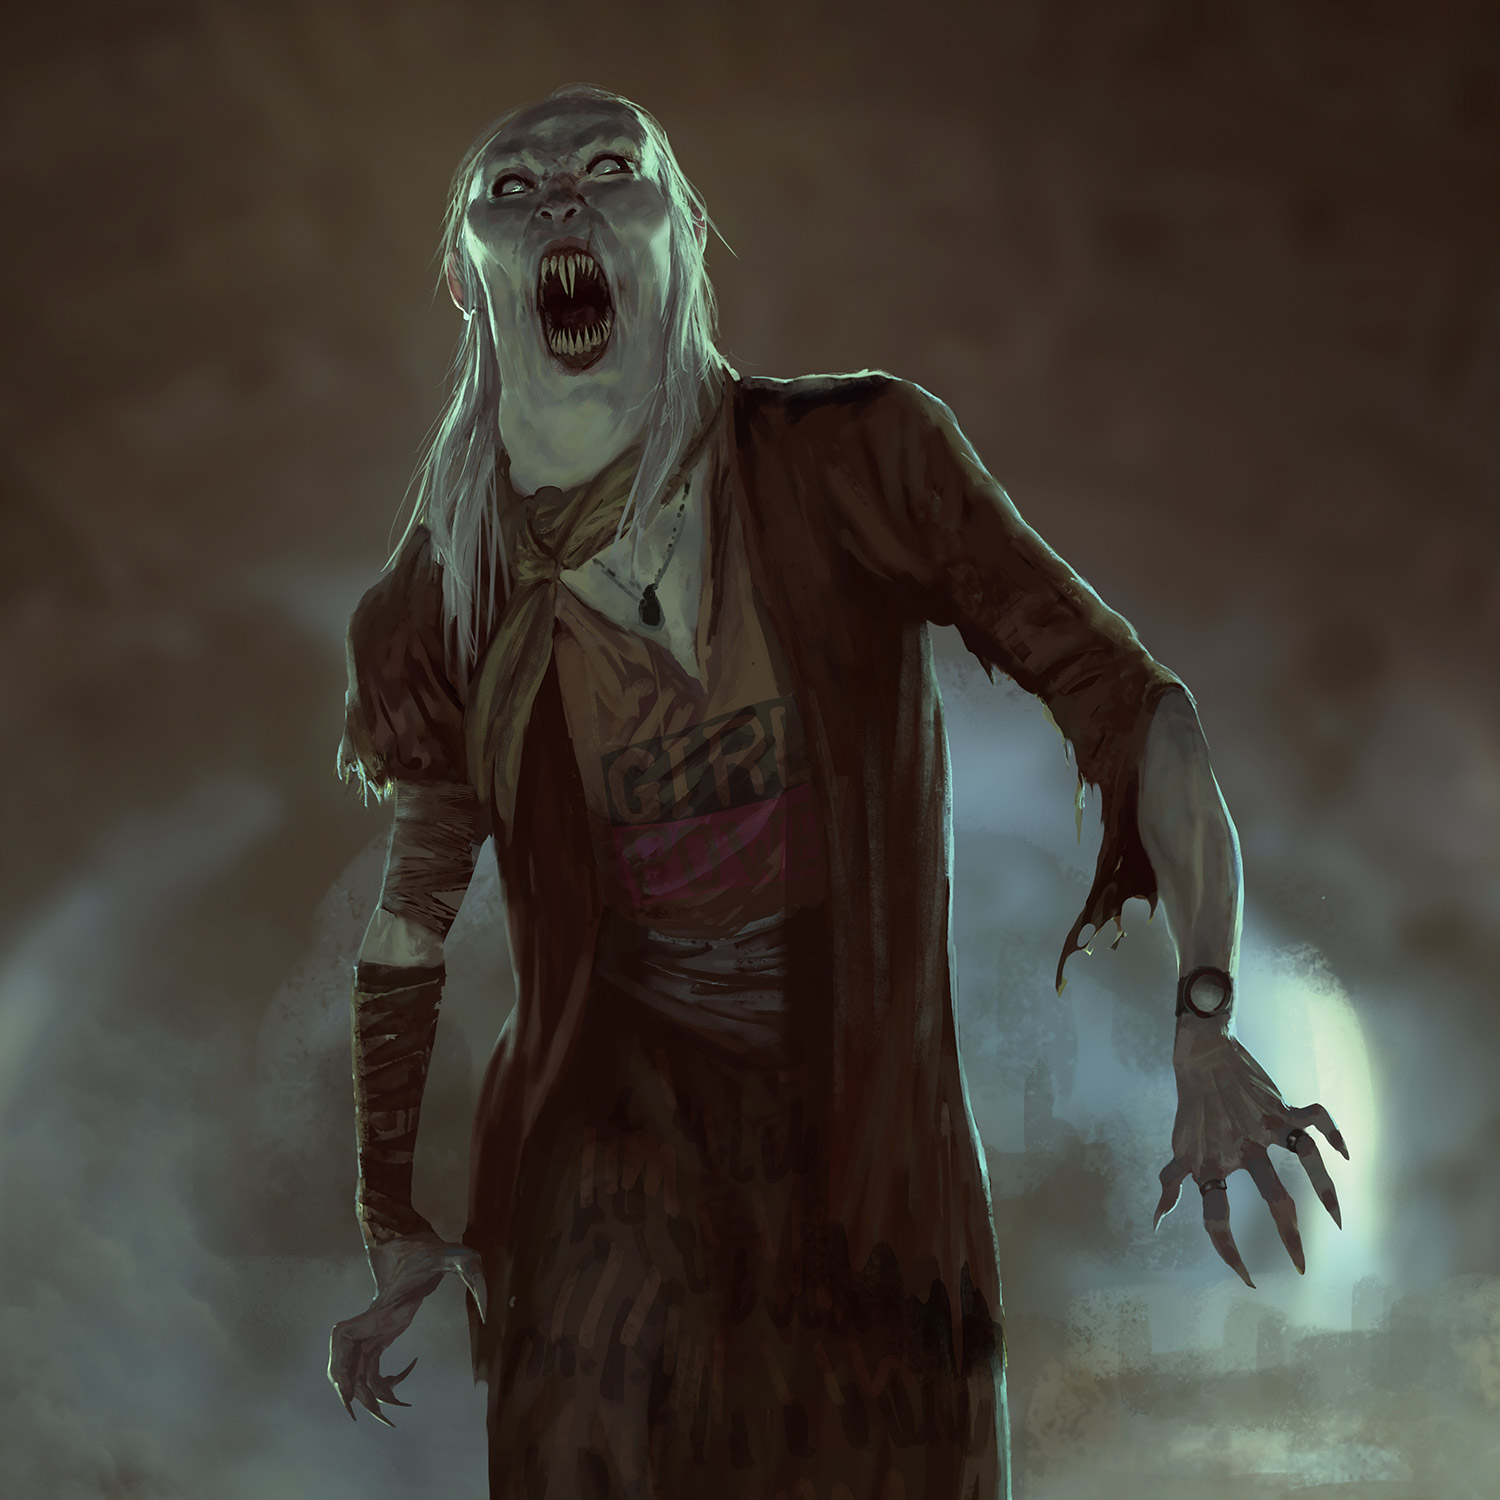 Vampire: The Masquerade – CHAPTERS, Teaser Trailer, Discover the first  teaser trailer of Vampire: The Masquerade – CHAPTERS. An RPG in a box  with 8 playable characters, highly detailed miniatures, over, By FLYOS